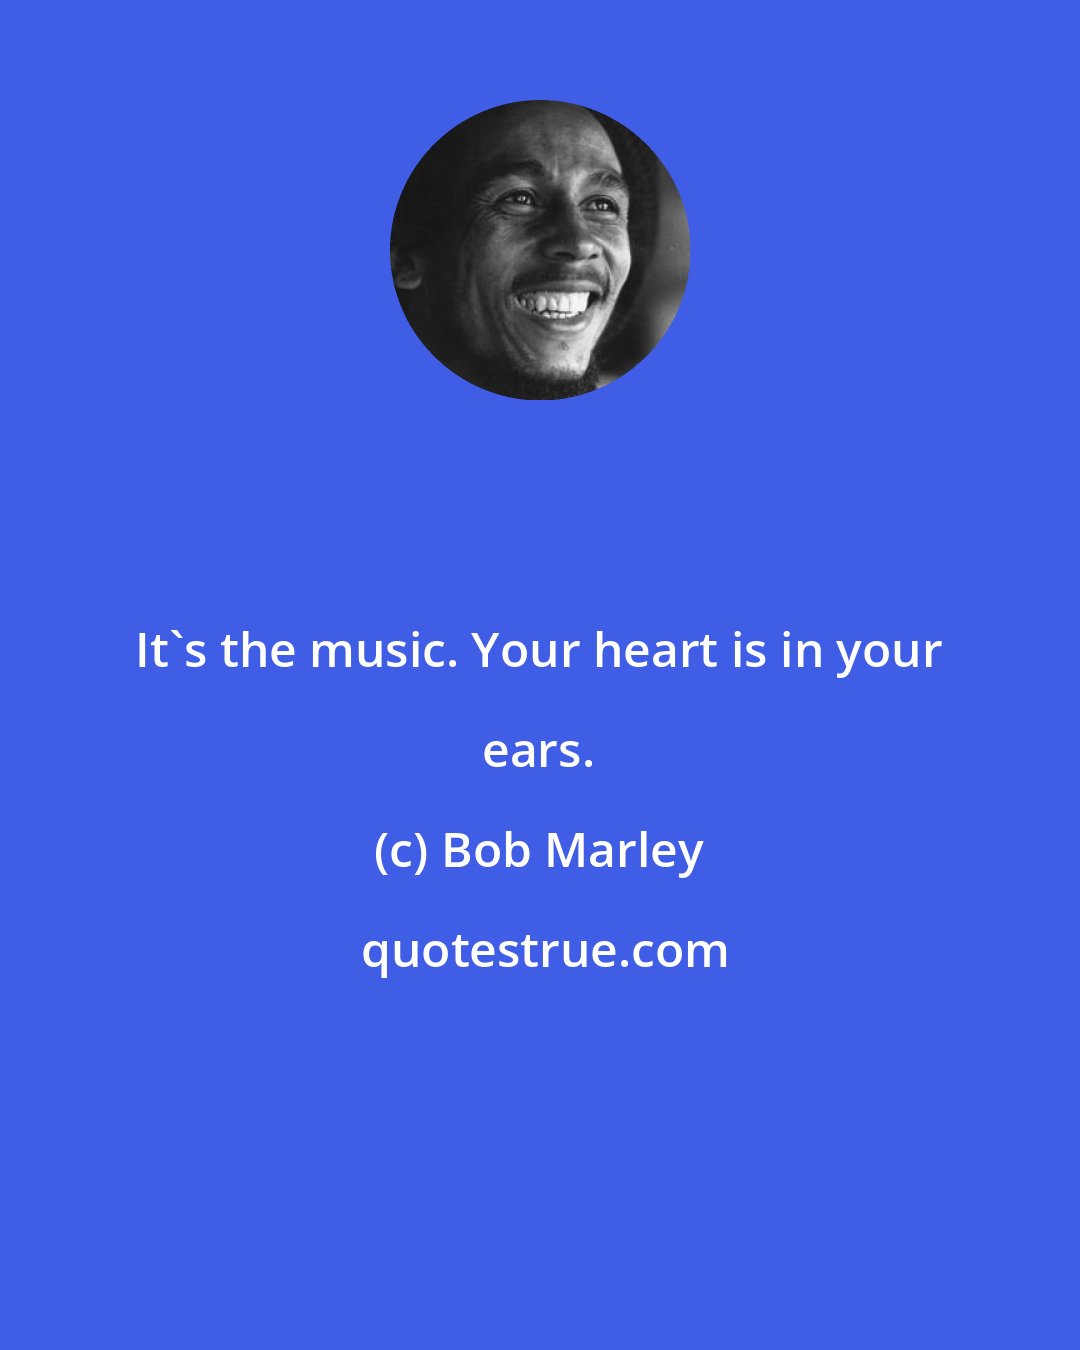 Bob Marley: It's the music. Your heart is in your ears.